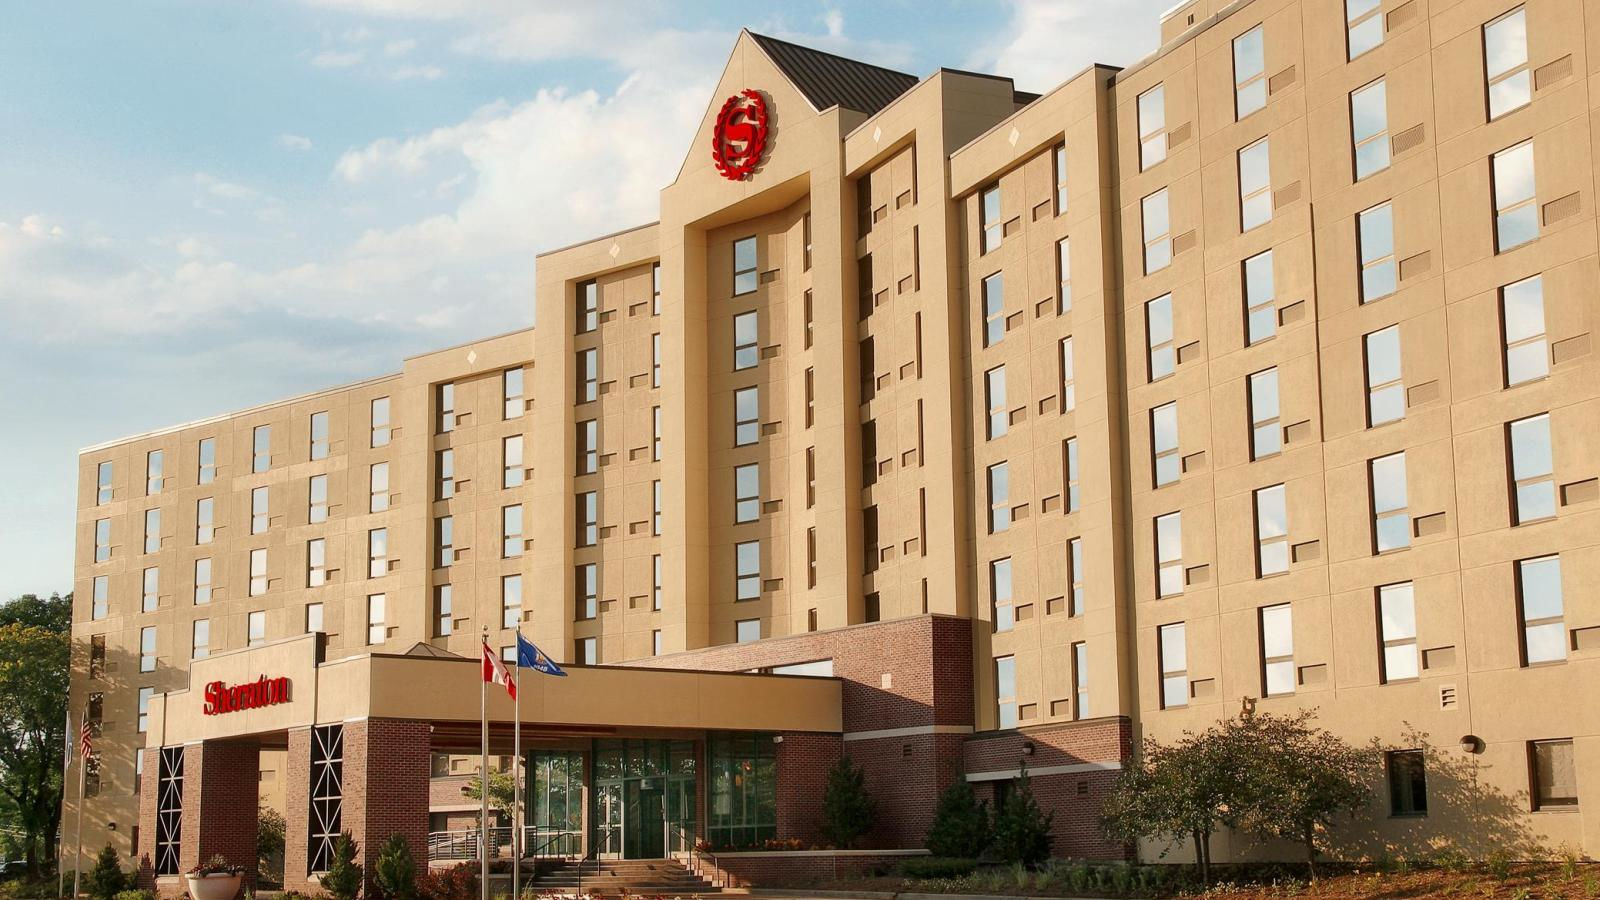 The management agreement is the first between Waterton and the hotels new owner Chattanooga Tenn-based DeFoor Brothers 